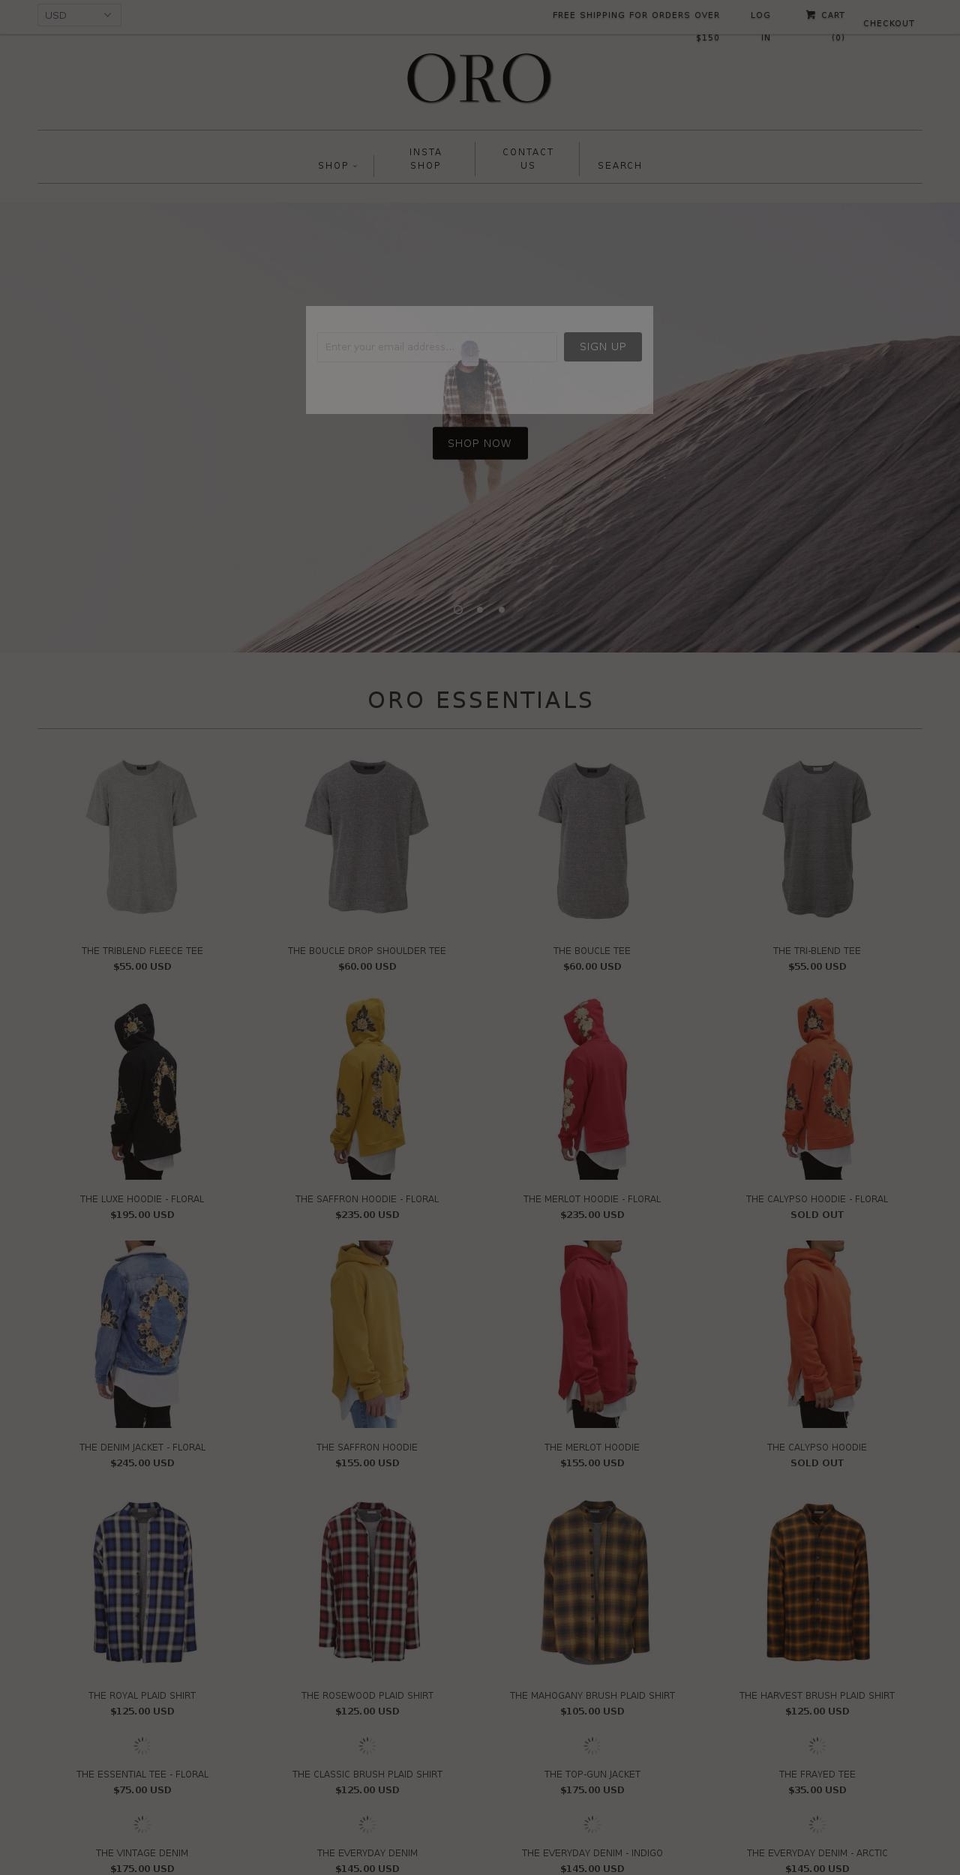 GE-migr__ - Copy of Seed - Oct ... Shopify theme site example orolosangeles.com